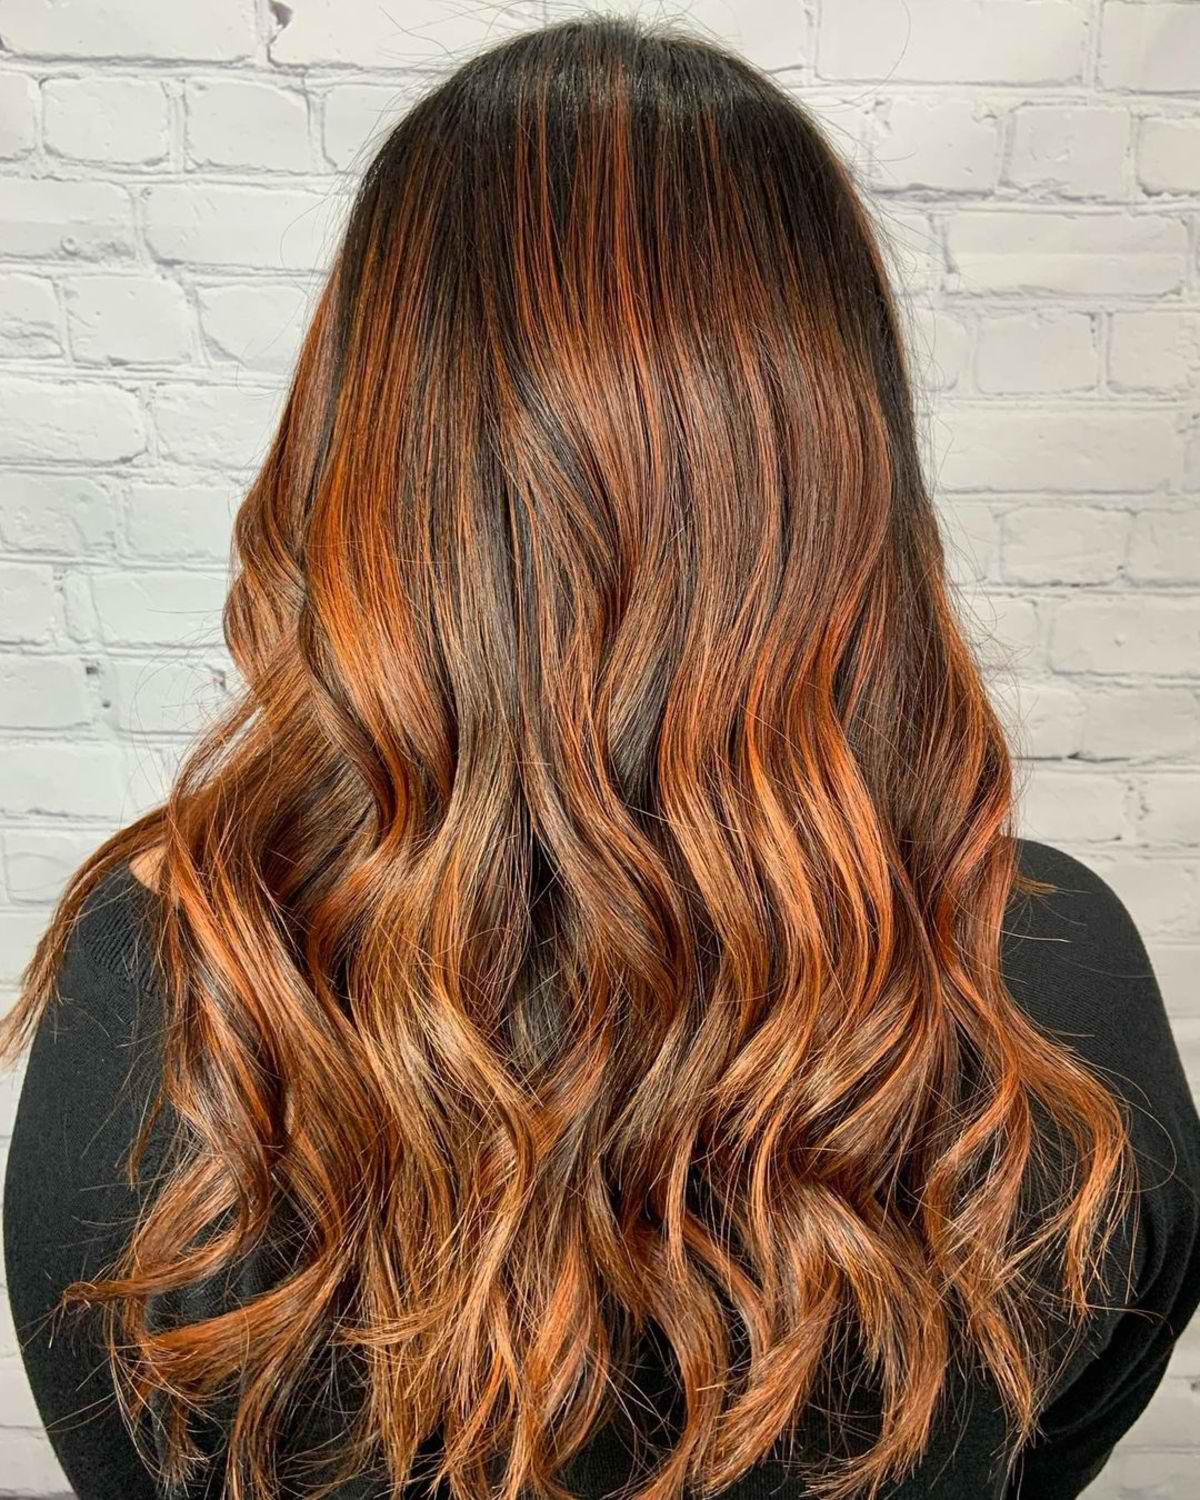 Bright copper brown highlights